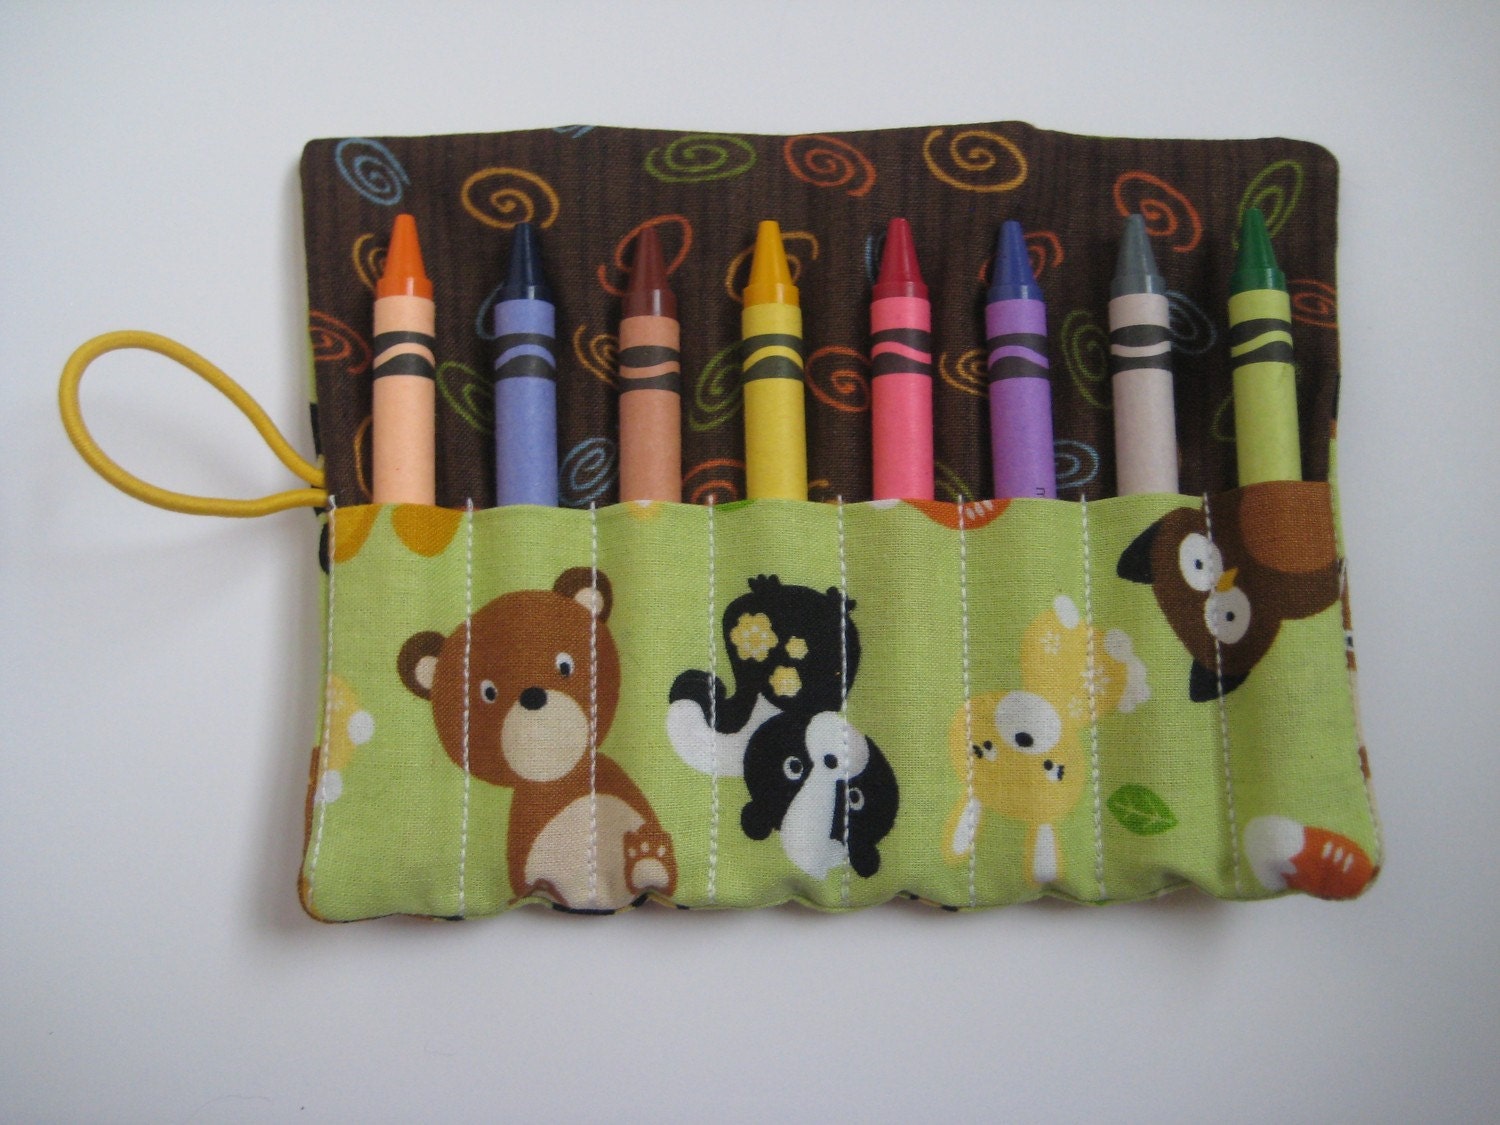 Forest Friends Crayon Roll Includes 8 Crayons - adorableblessings